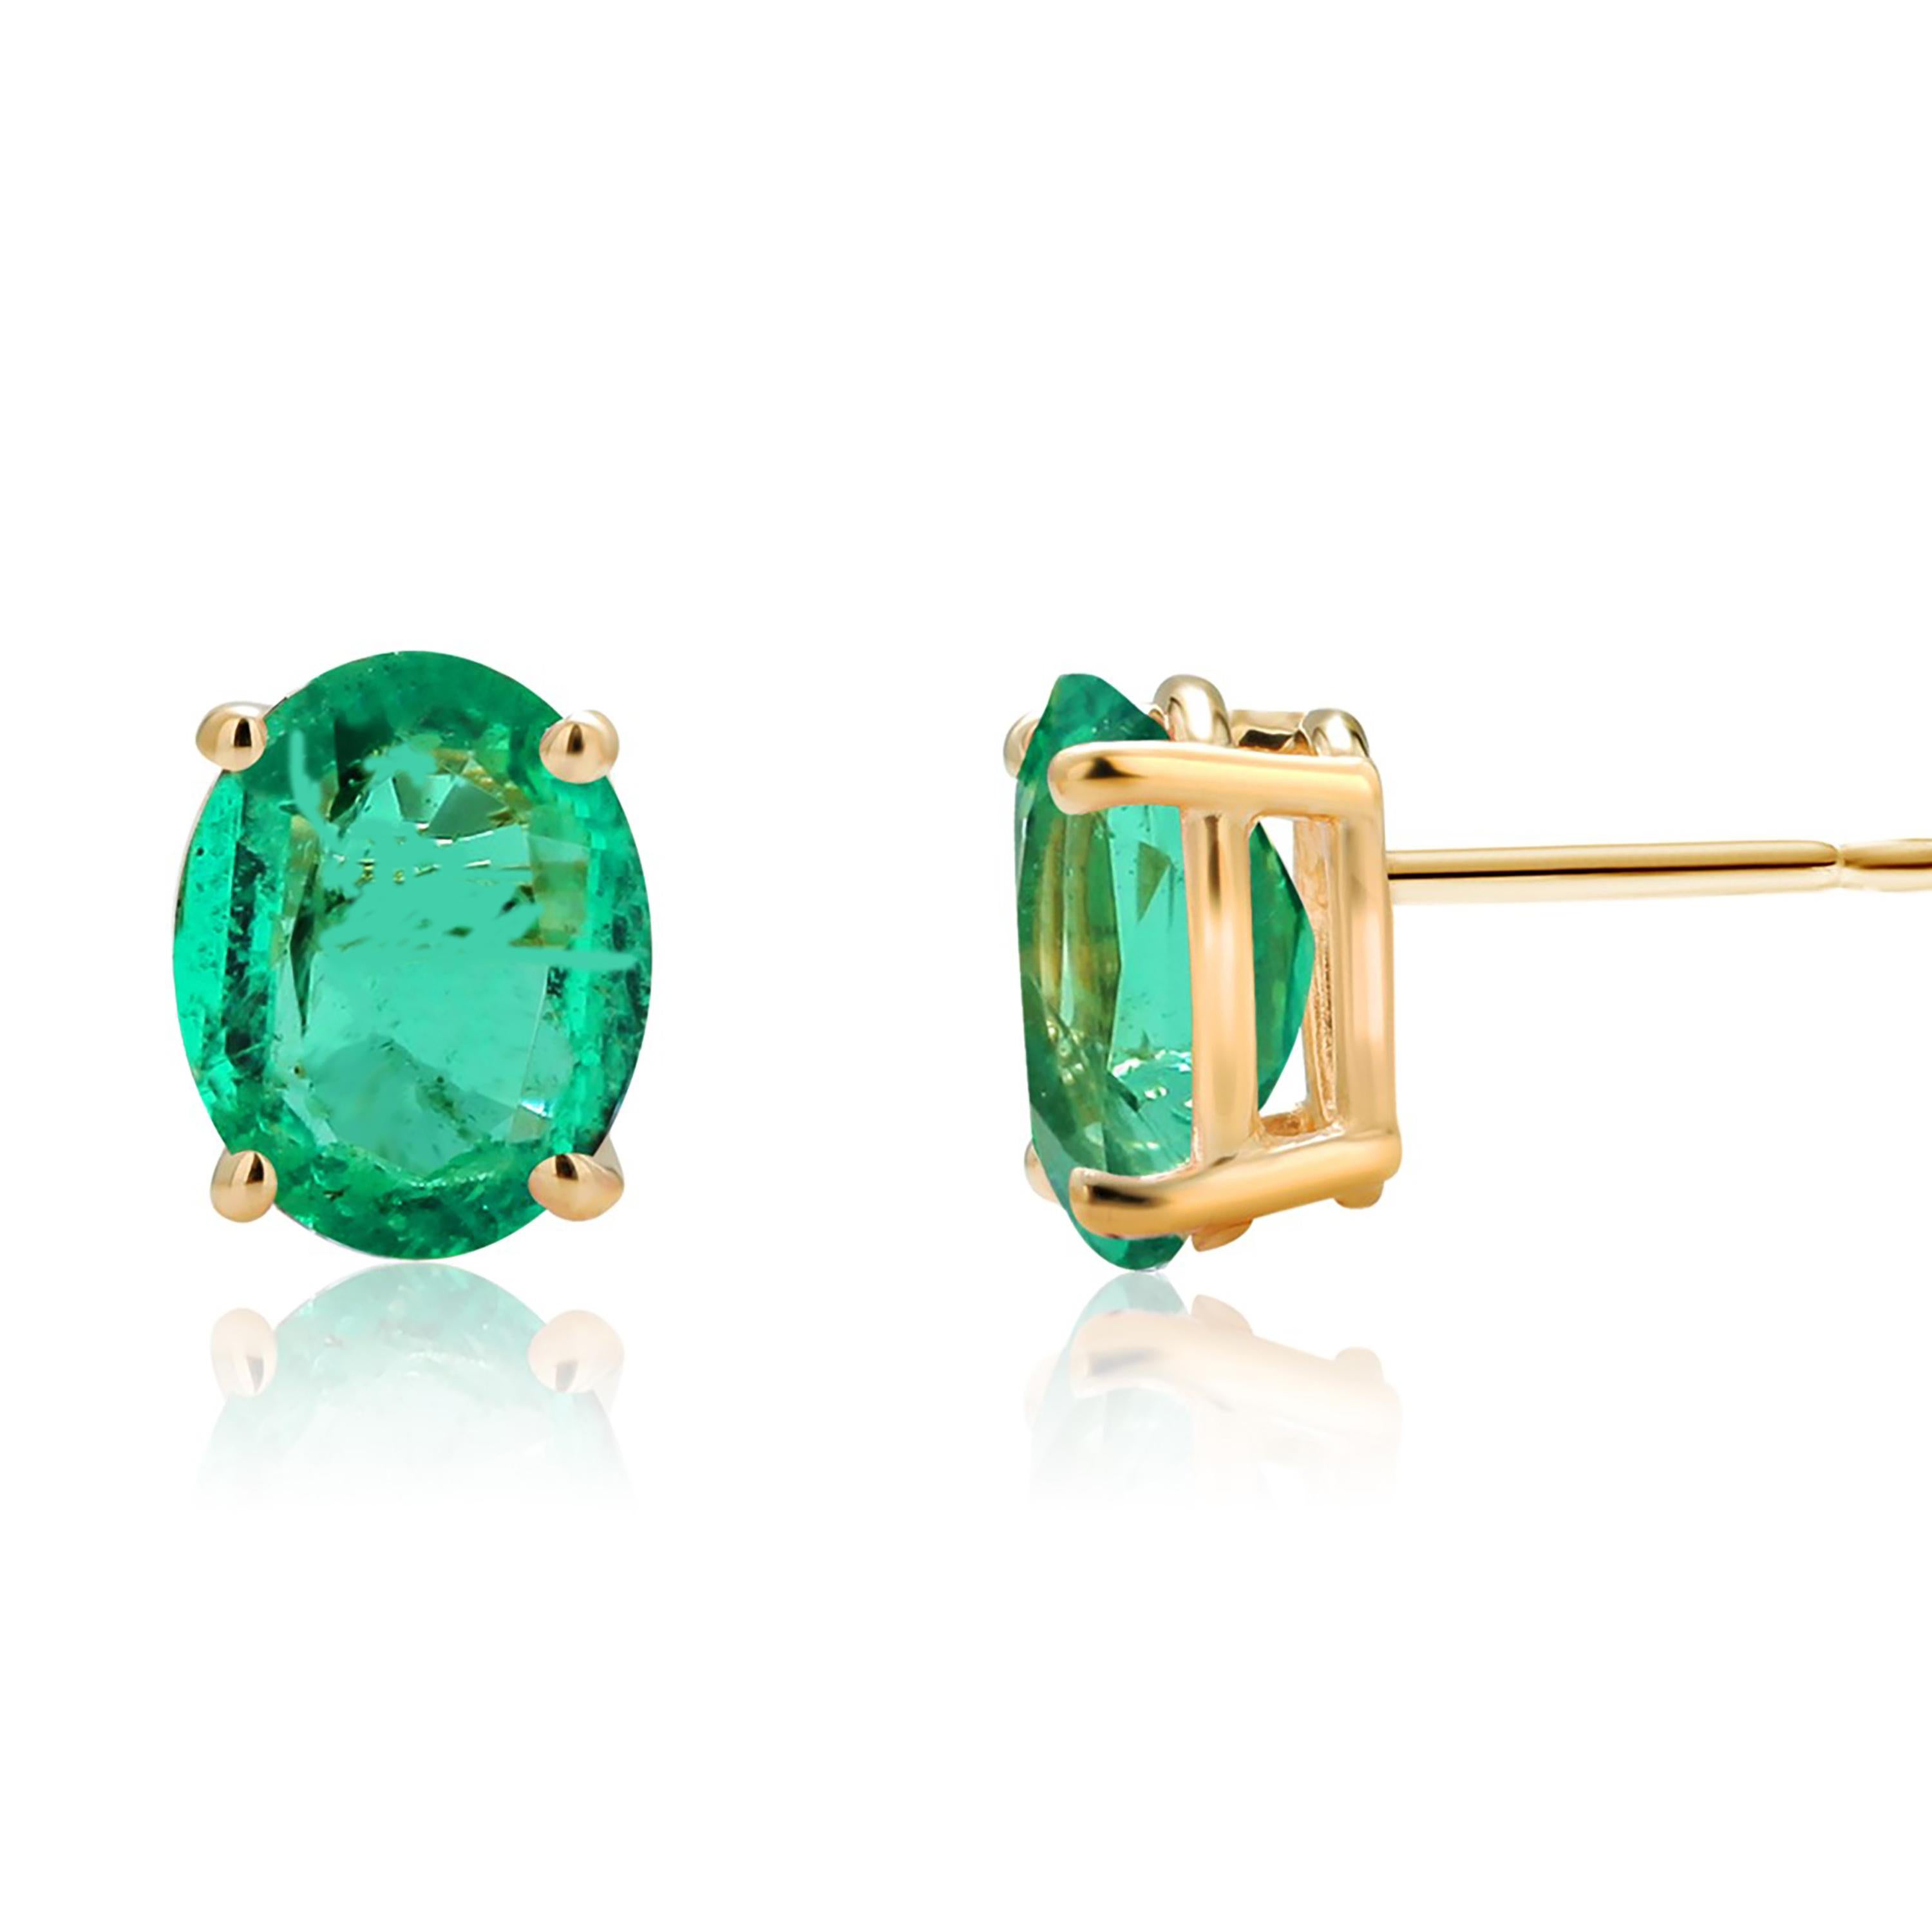 Oval Shaped 0.50 Carat Emerald Set in Yellow Gold 0.21 Inch Stud Earrings For Sale 2